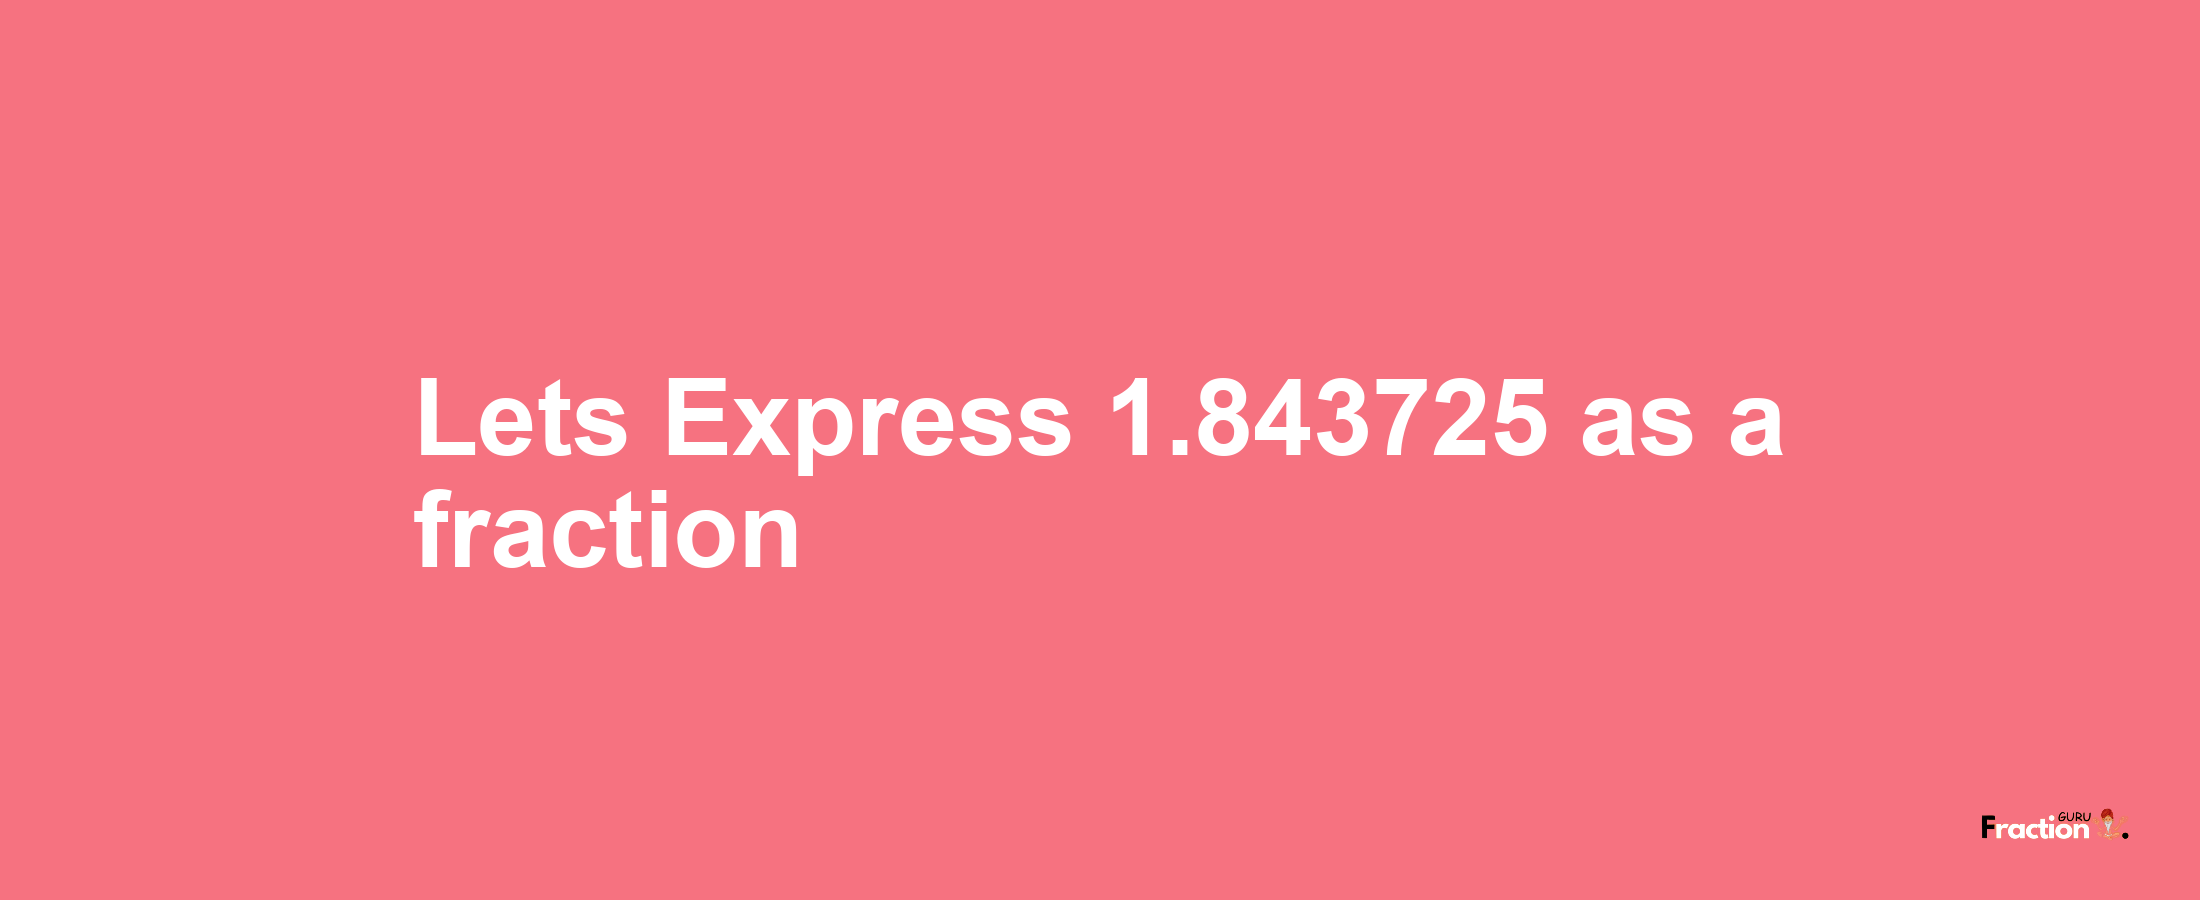 Lets Express 1.843725 as afraction